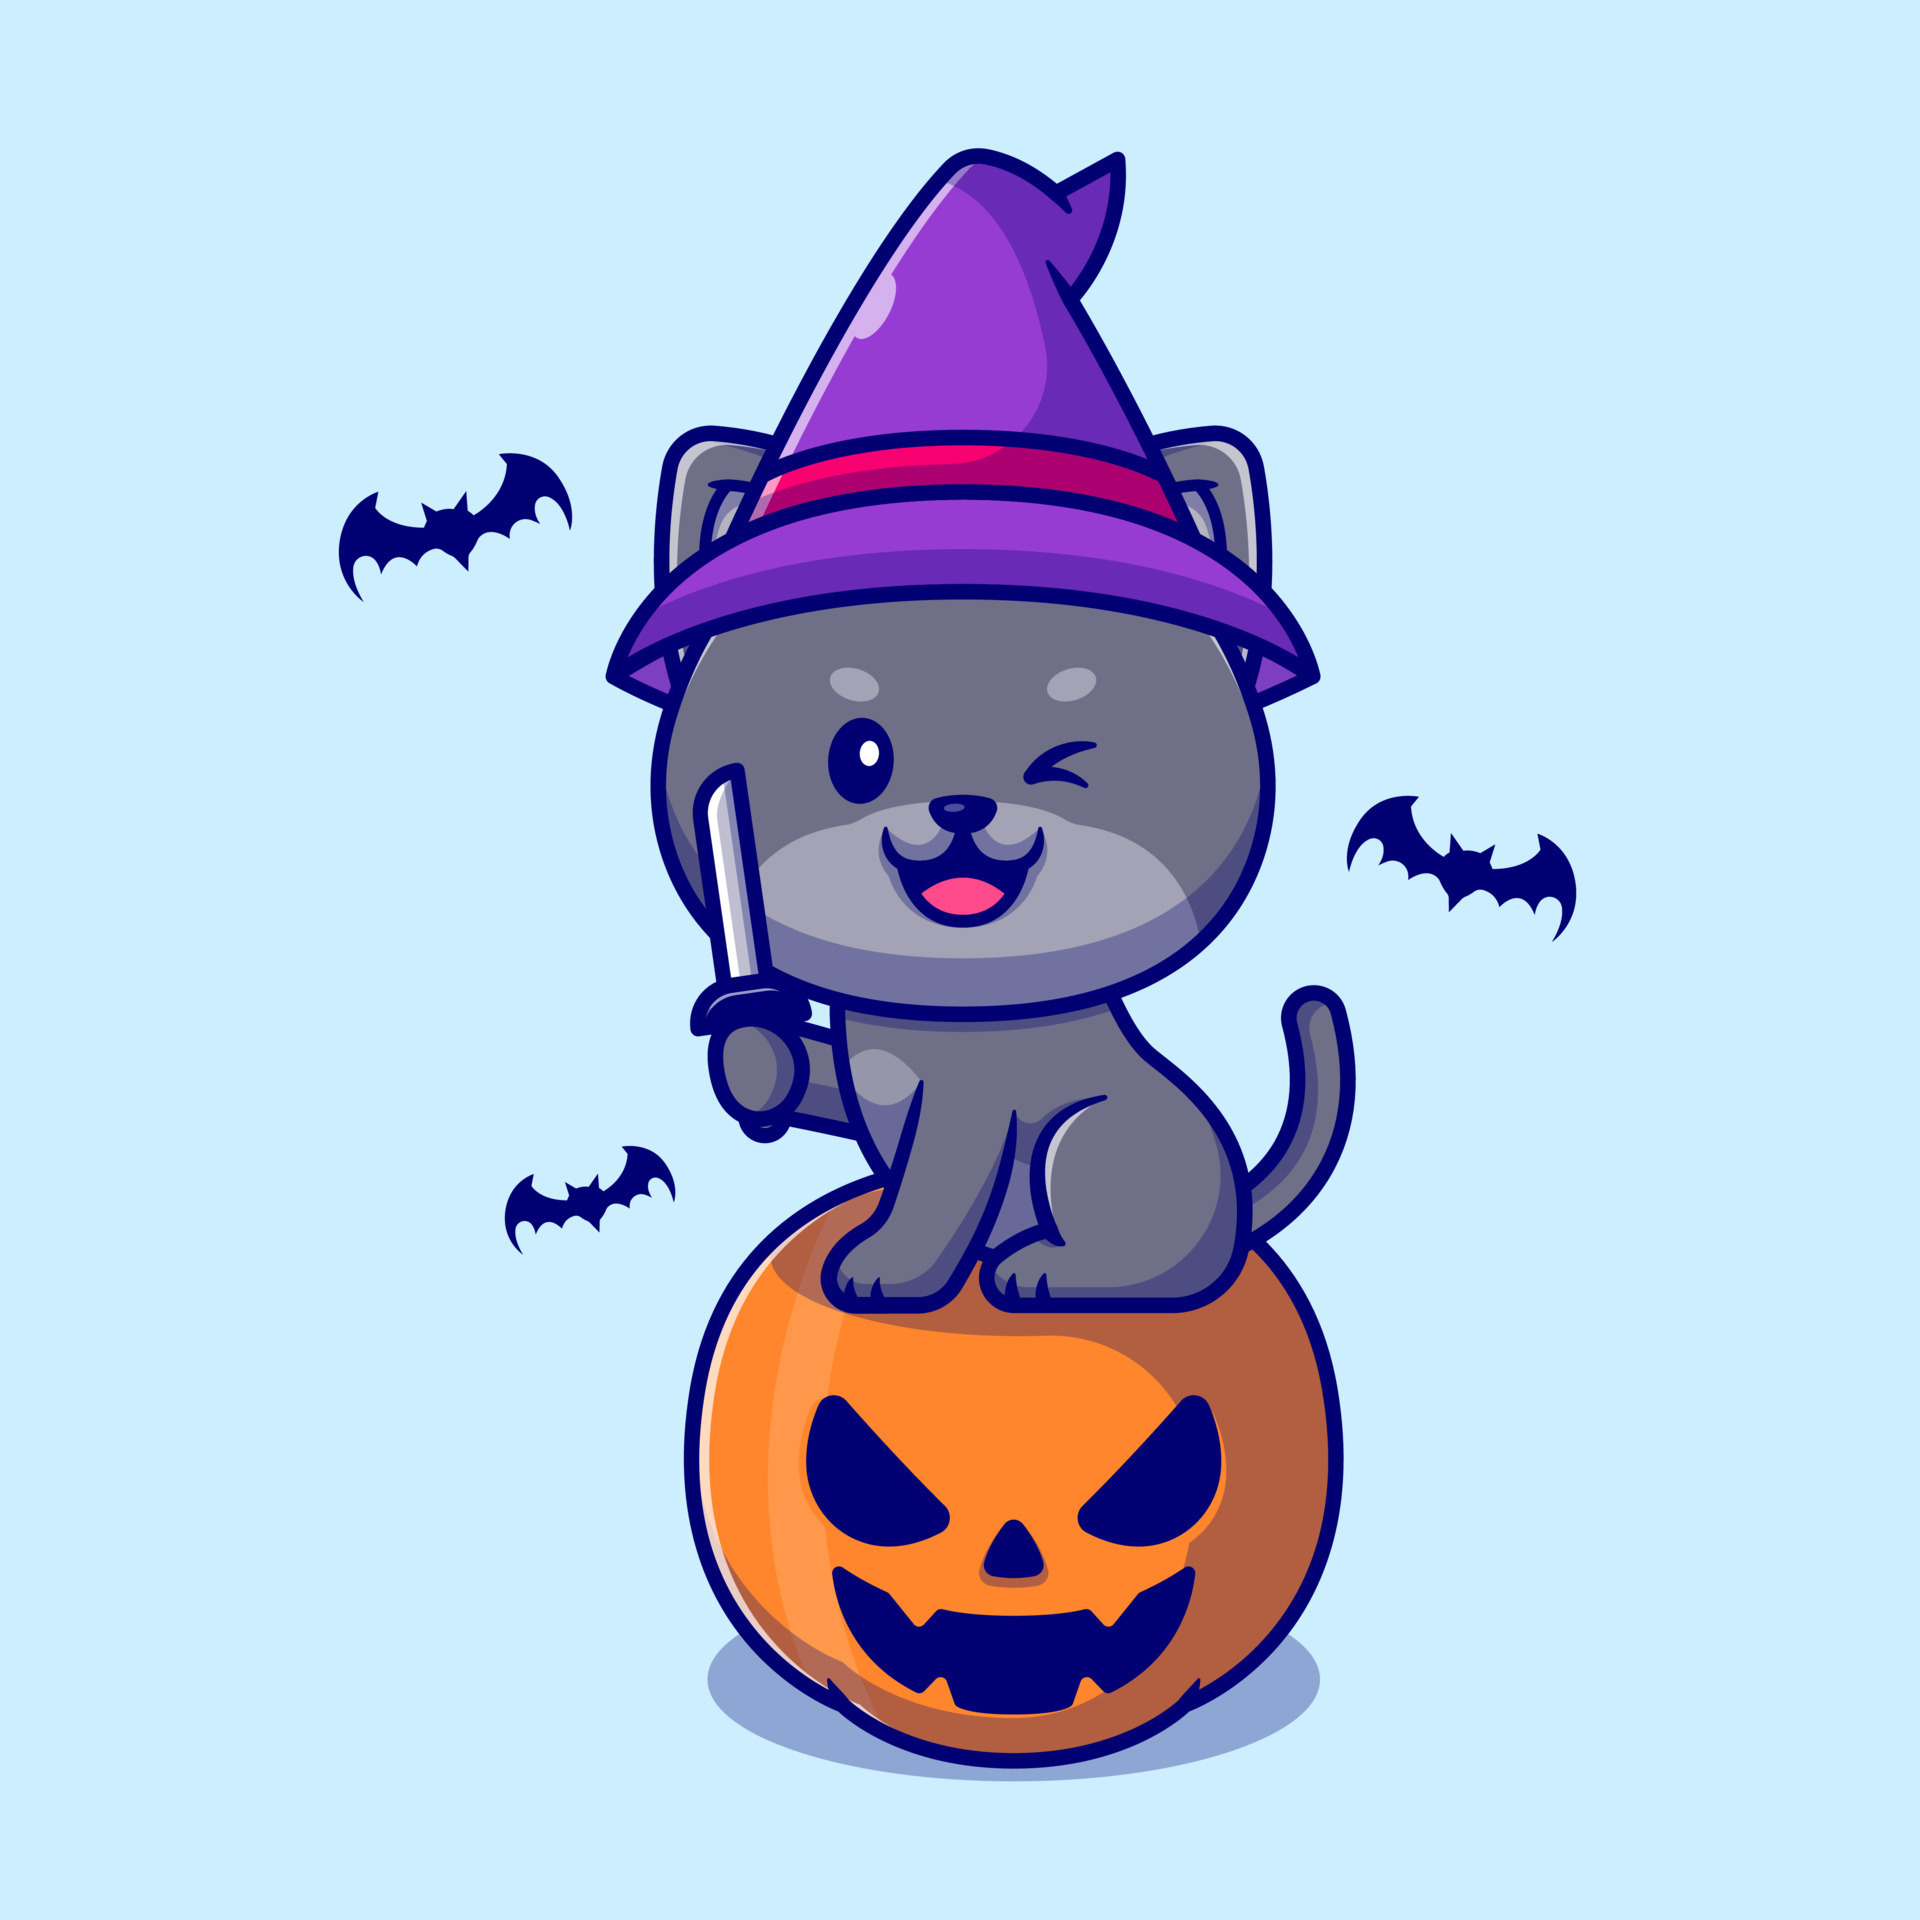 Premium Vector  Halloween illustration with a funny cat and pumpkin